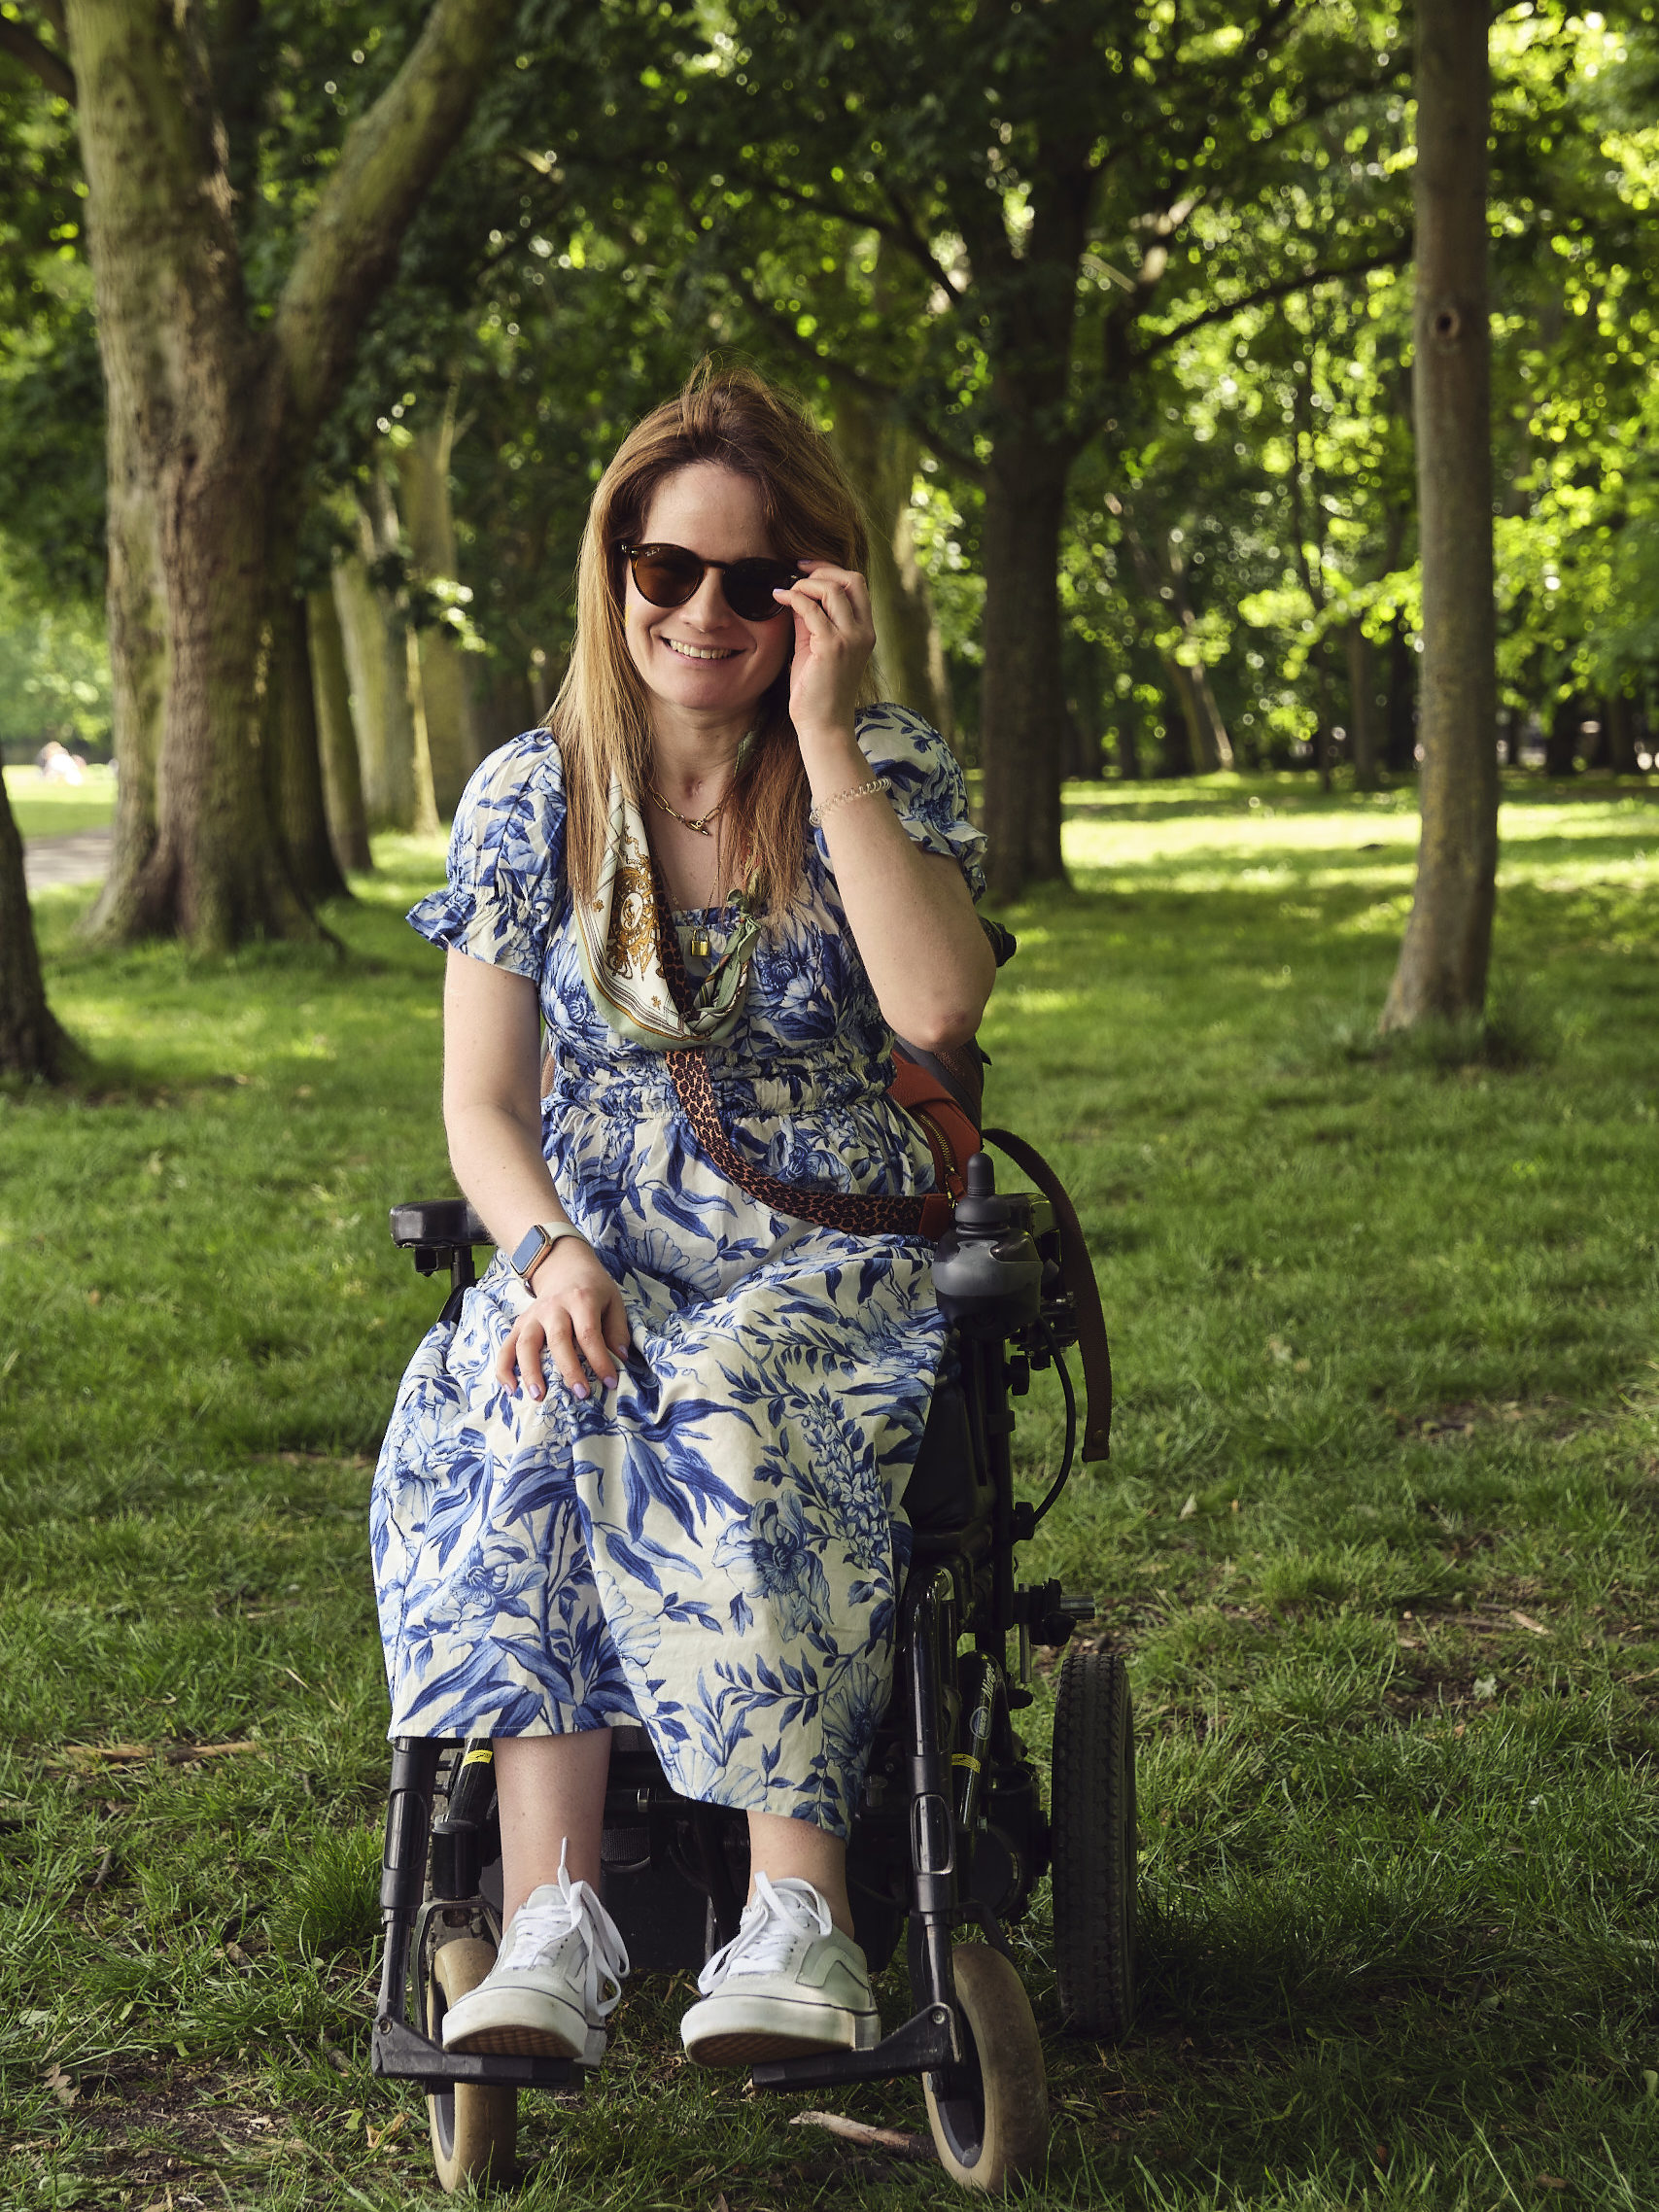 A woman, Karen, in a wheelchair on the grass in Regent's Park, in front of some trees